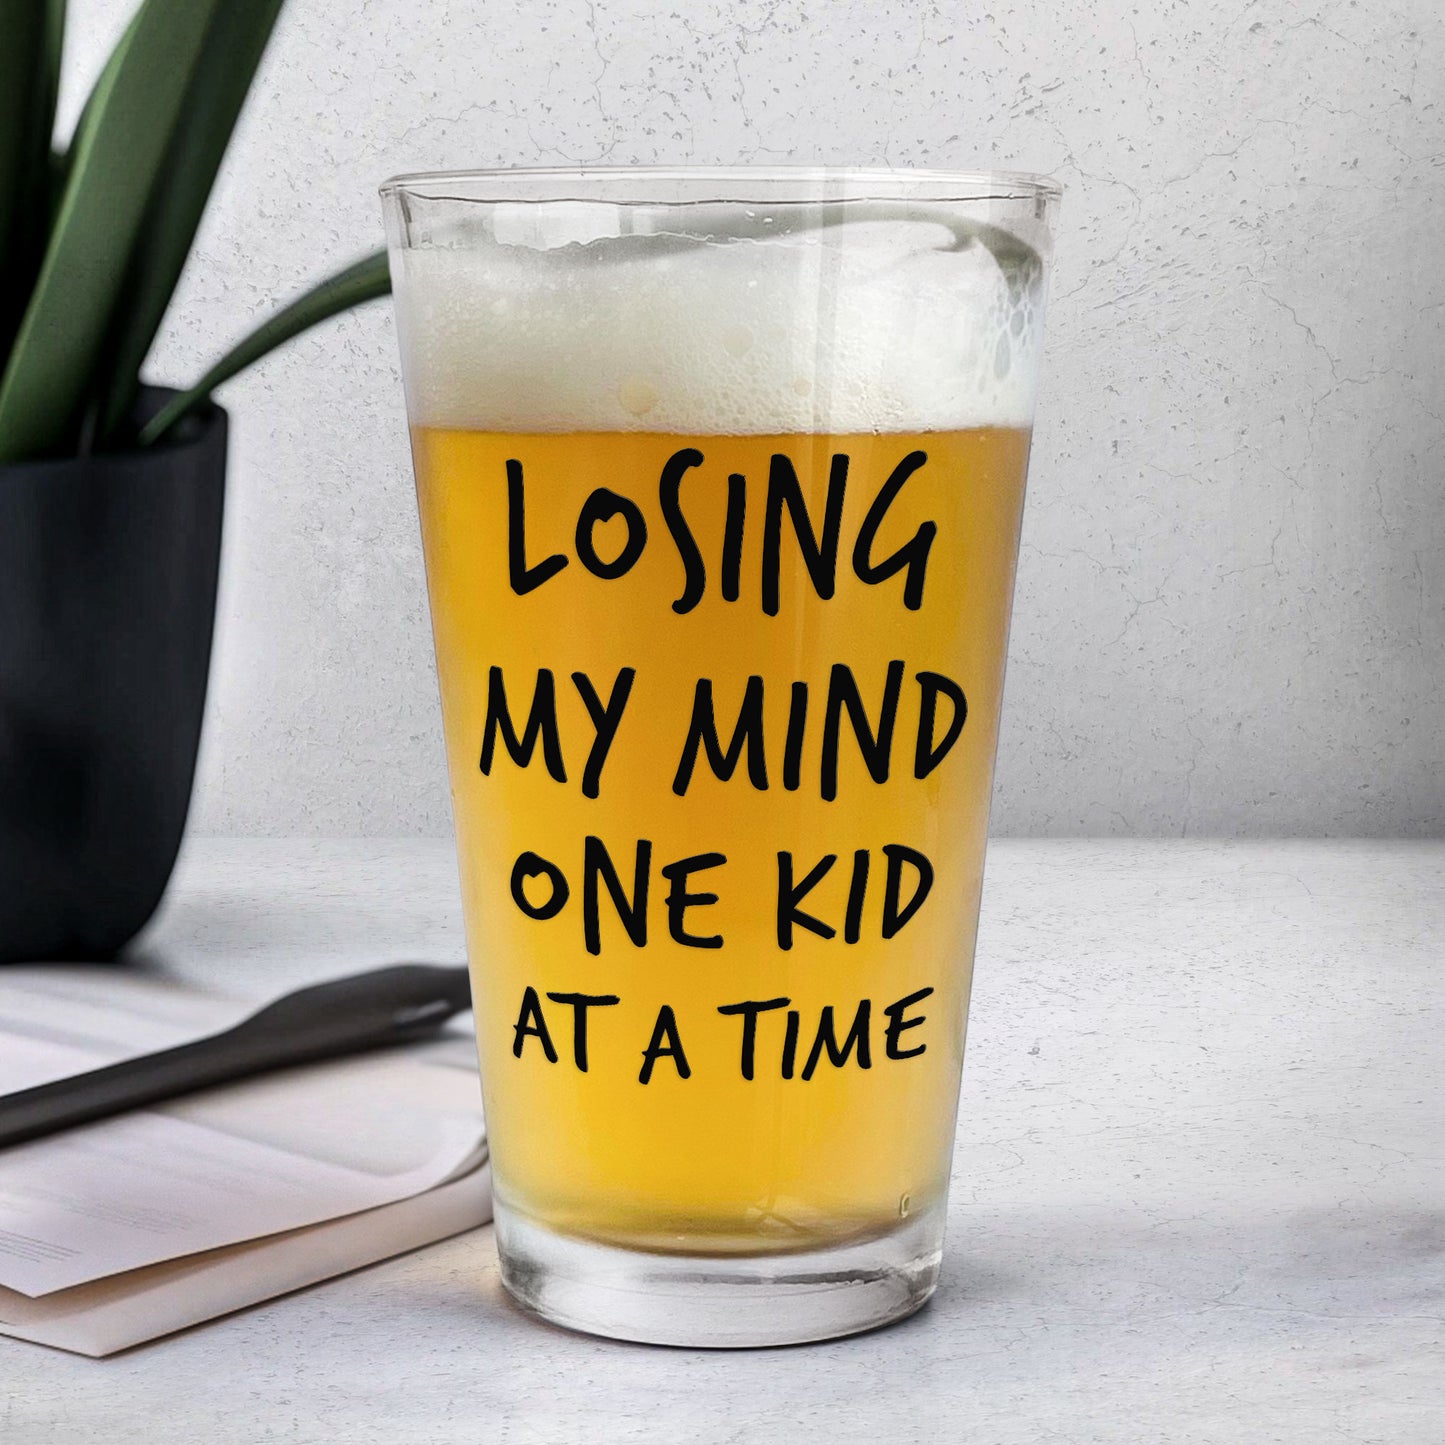 Losing My Mind One Kid At A Time - Personalized Beer Glass